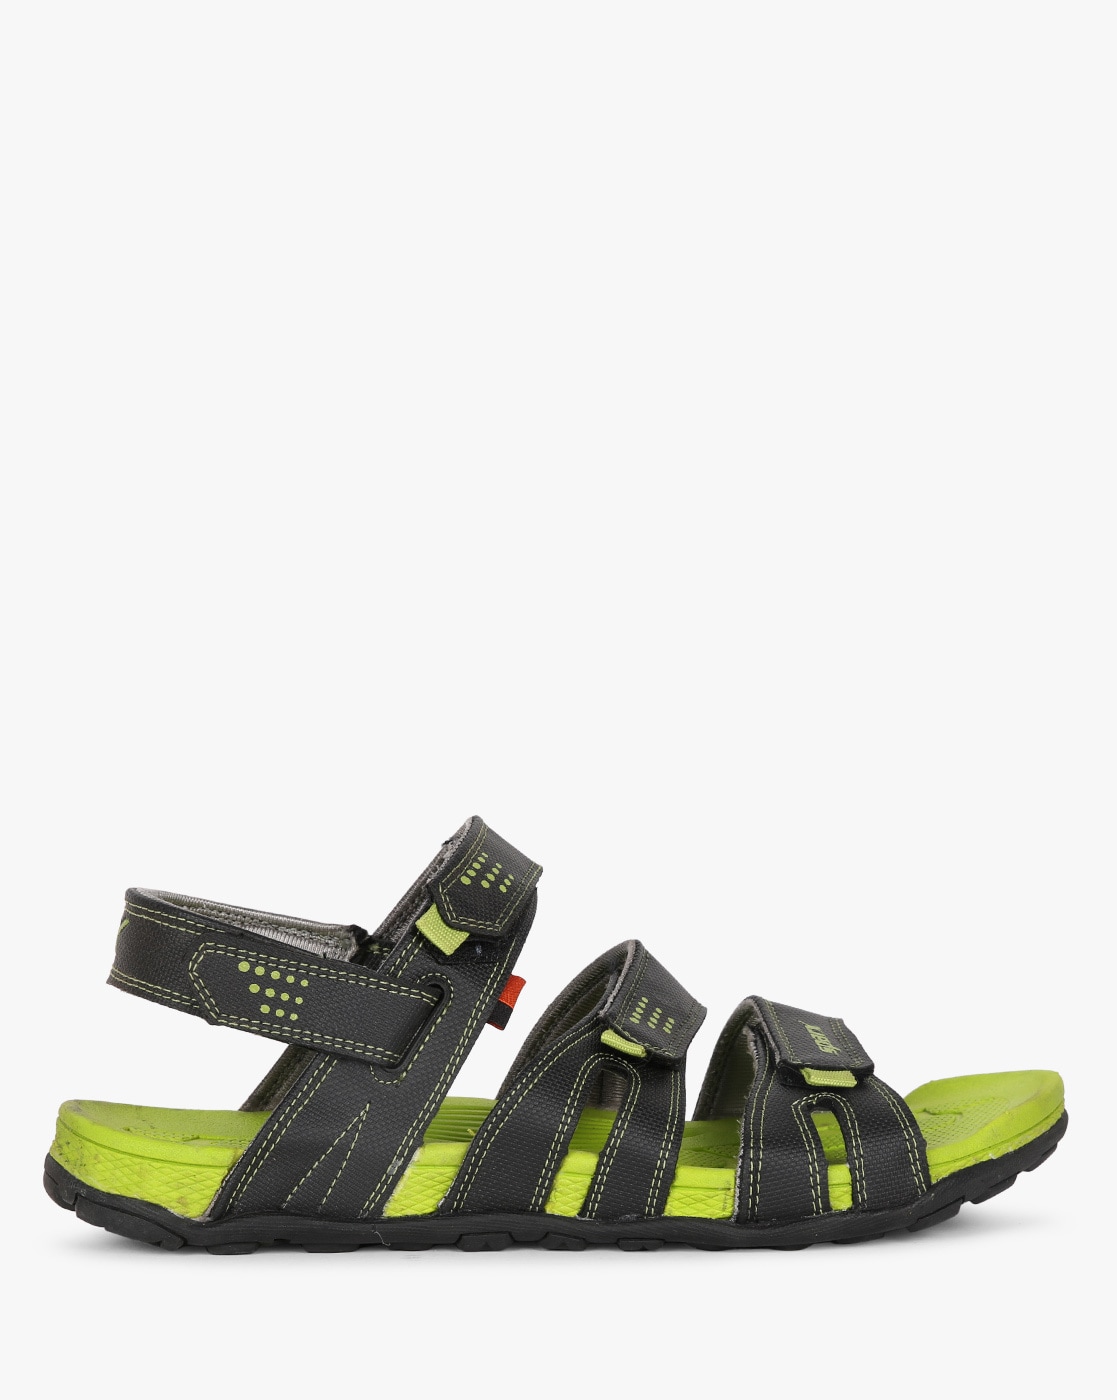 WOODLAND OLIVE GREEN SANDAL/ FOR MEN in Palghar at best price by Style King  Footwear - Justdial